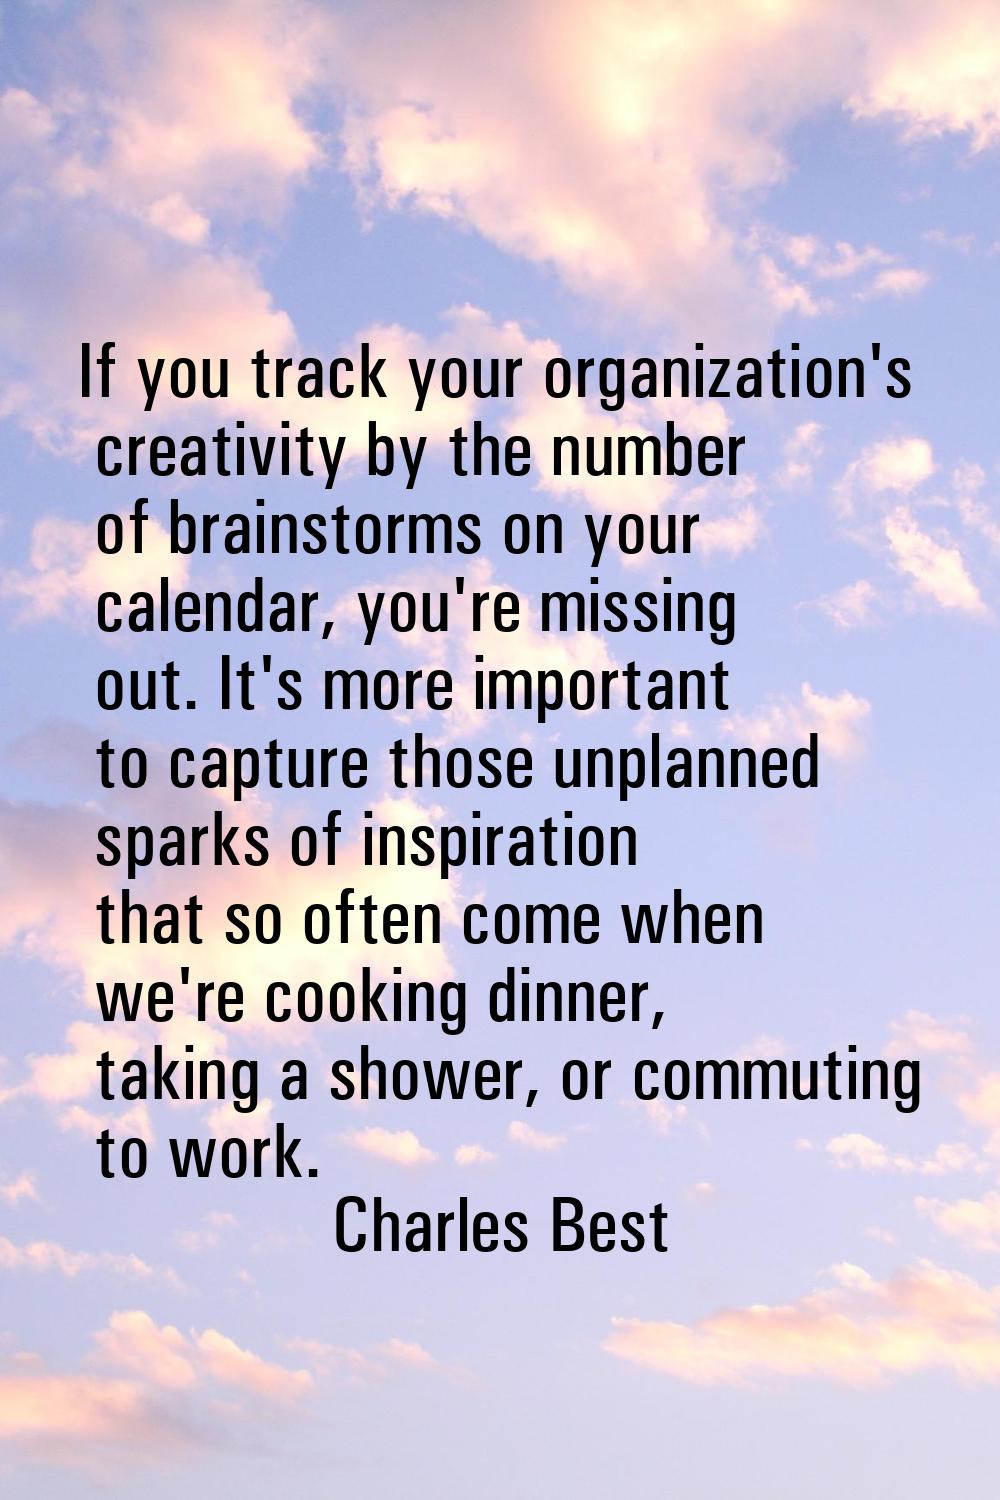 If you track your organization's creativity by the number of brainstorms on your calendar, you're m